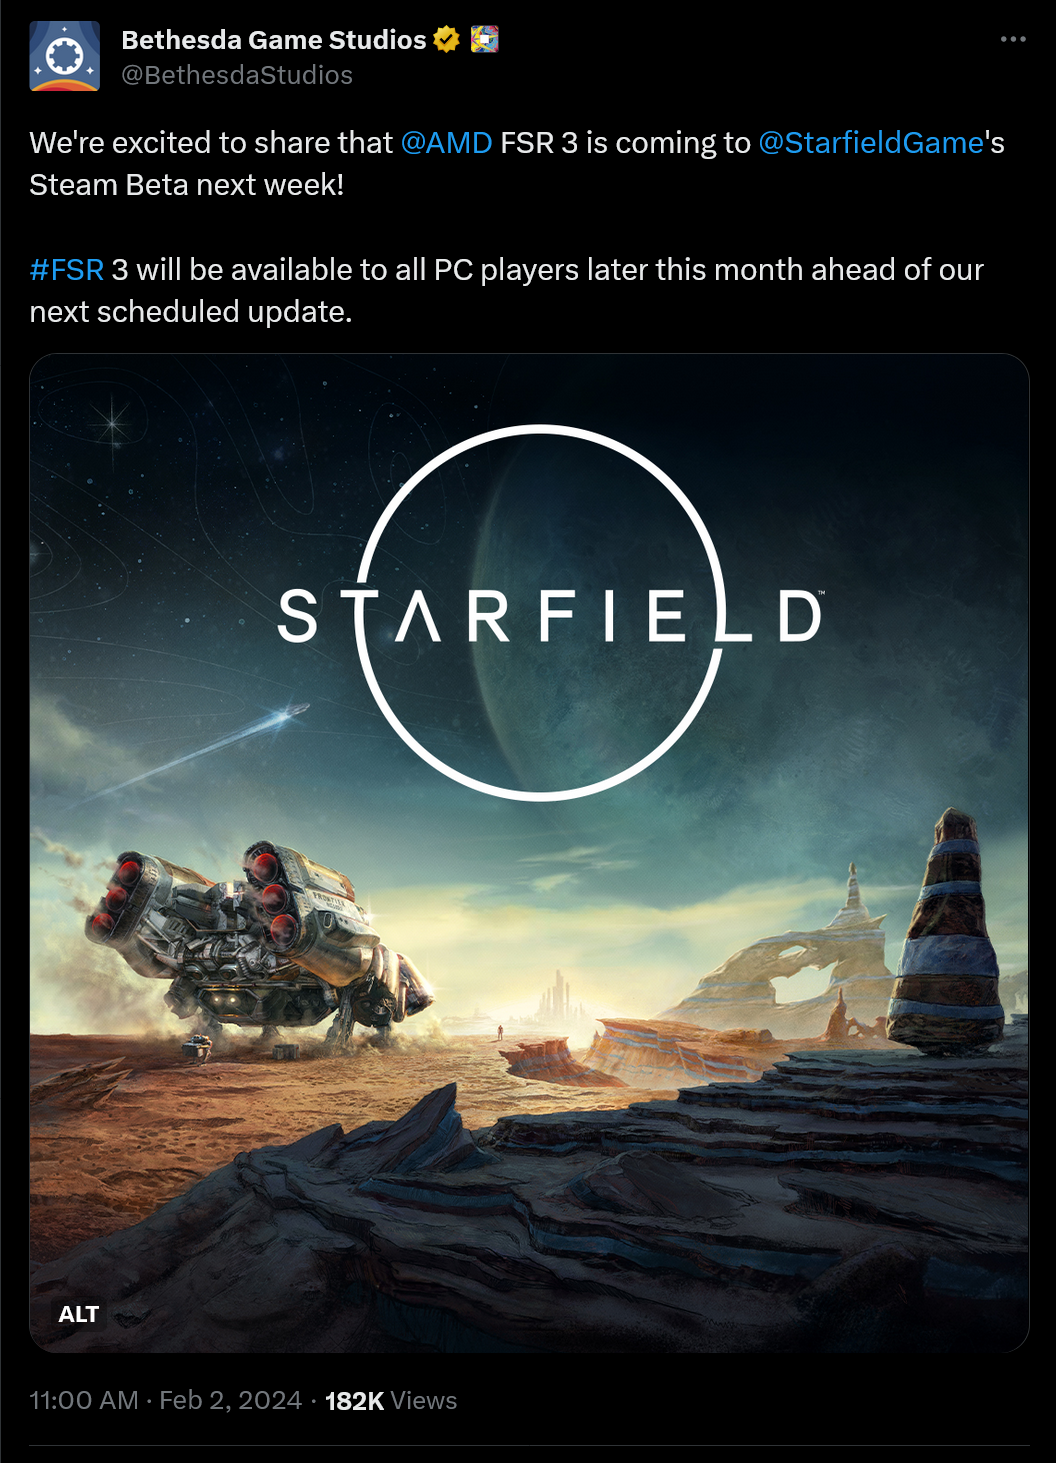 We're excited to share that @AMD FSR 3 is coming to @StarfieldGame 's Steam Beta next week! #FSR 3 will be available to all PC players later this month ahead of our next scheduled update.